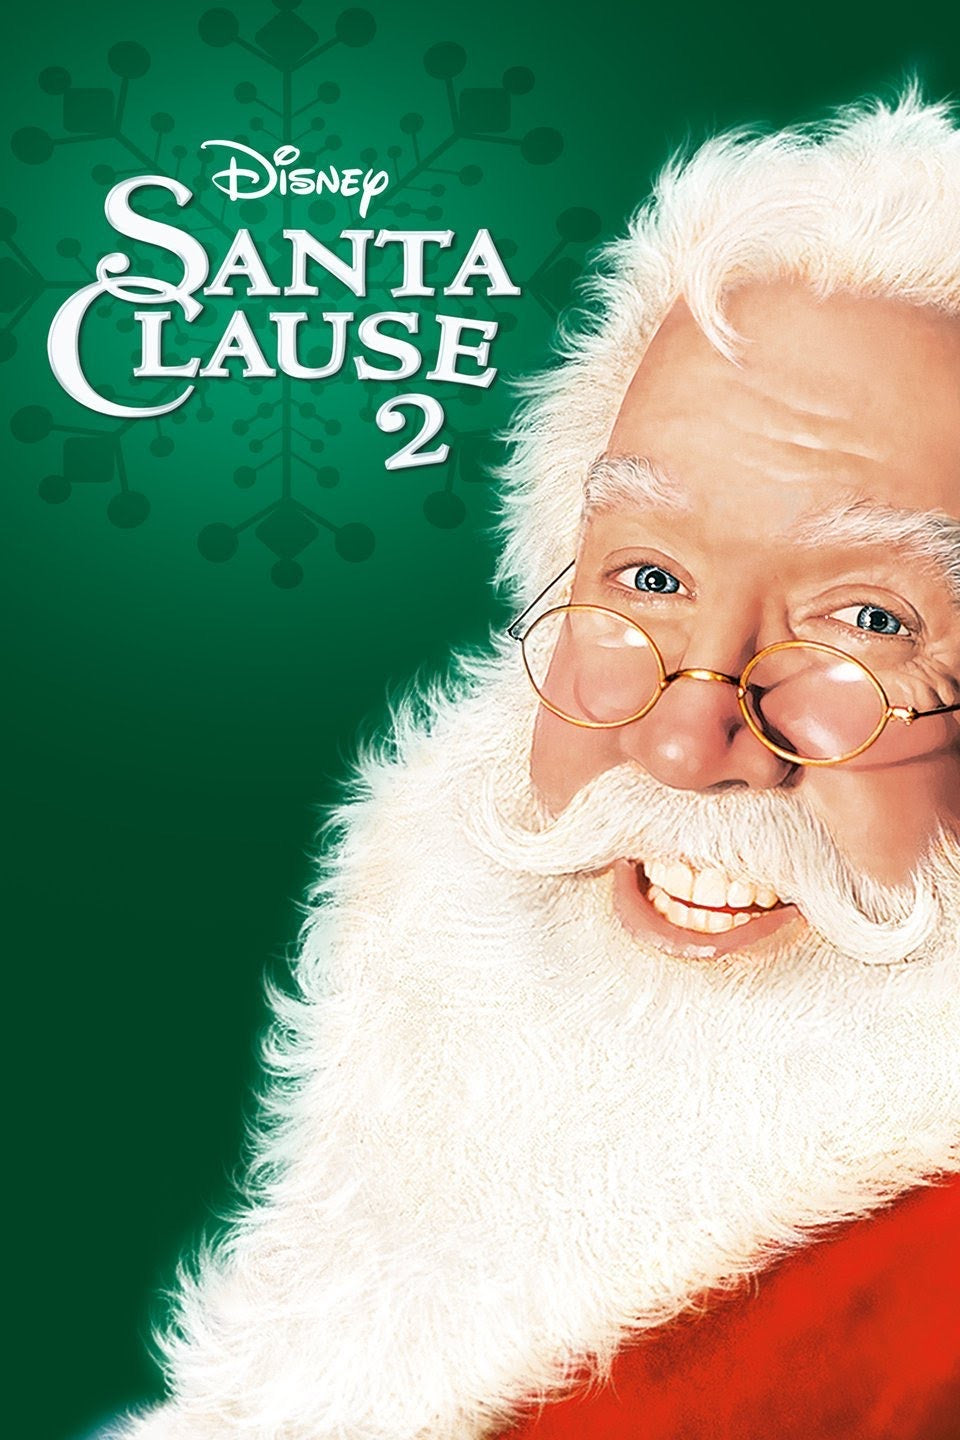 The Santa Clause 2 (2002) Vudu or Movies Anywhere HD redemption only